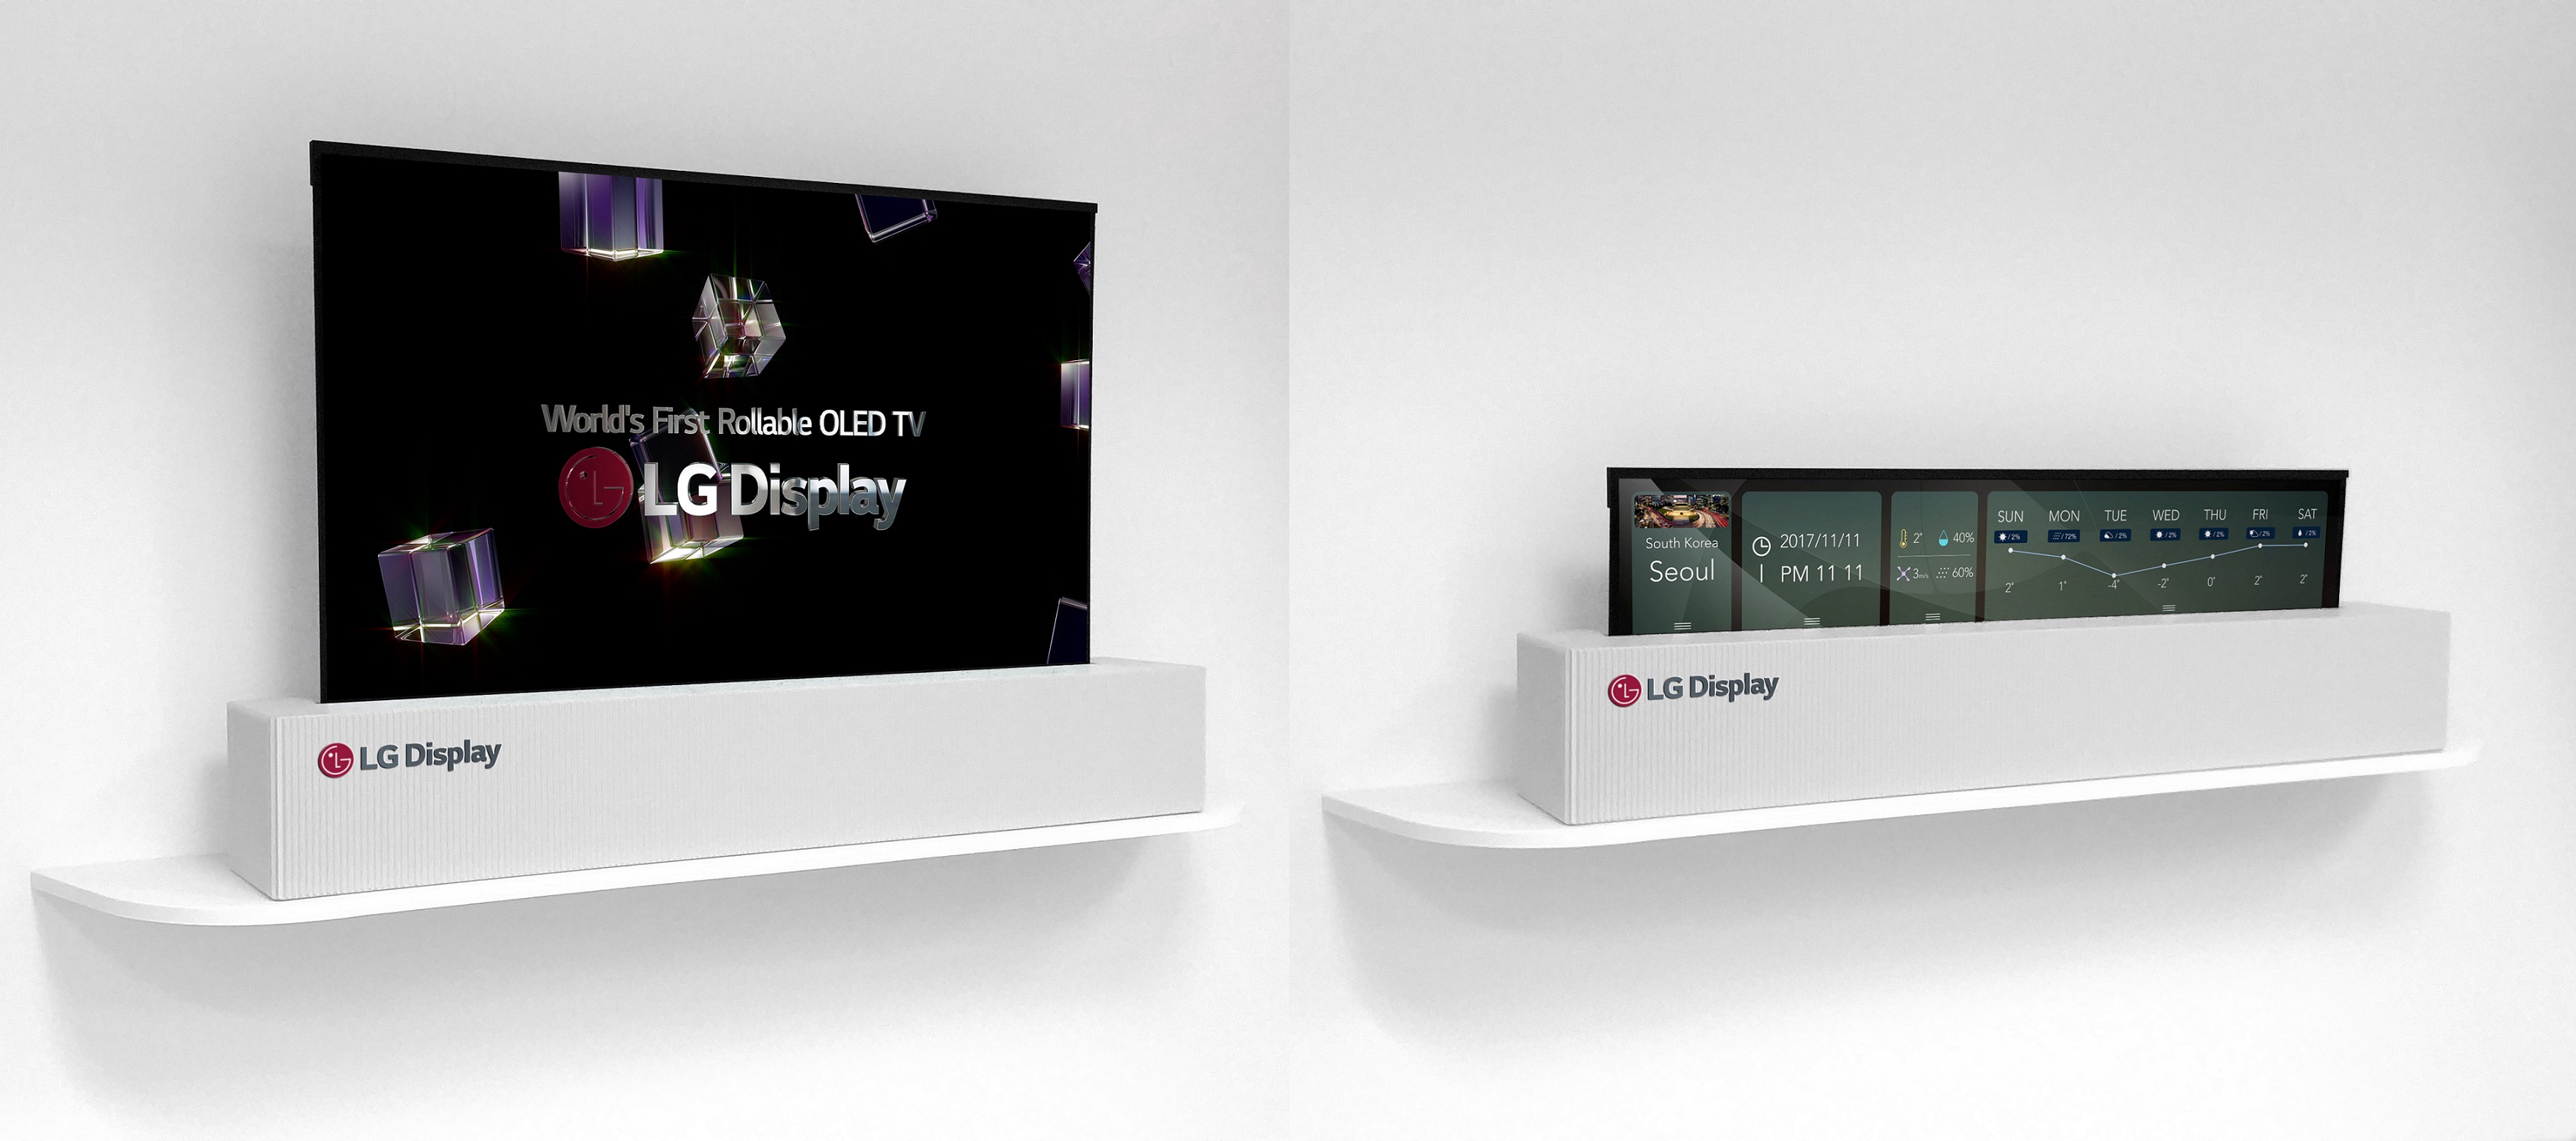 LG will make OLED TVs that roll up like posters a reality in 2019 – BGR3425 x 1517